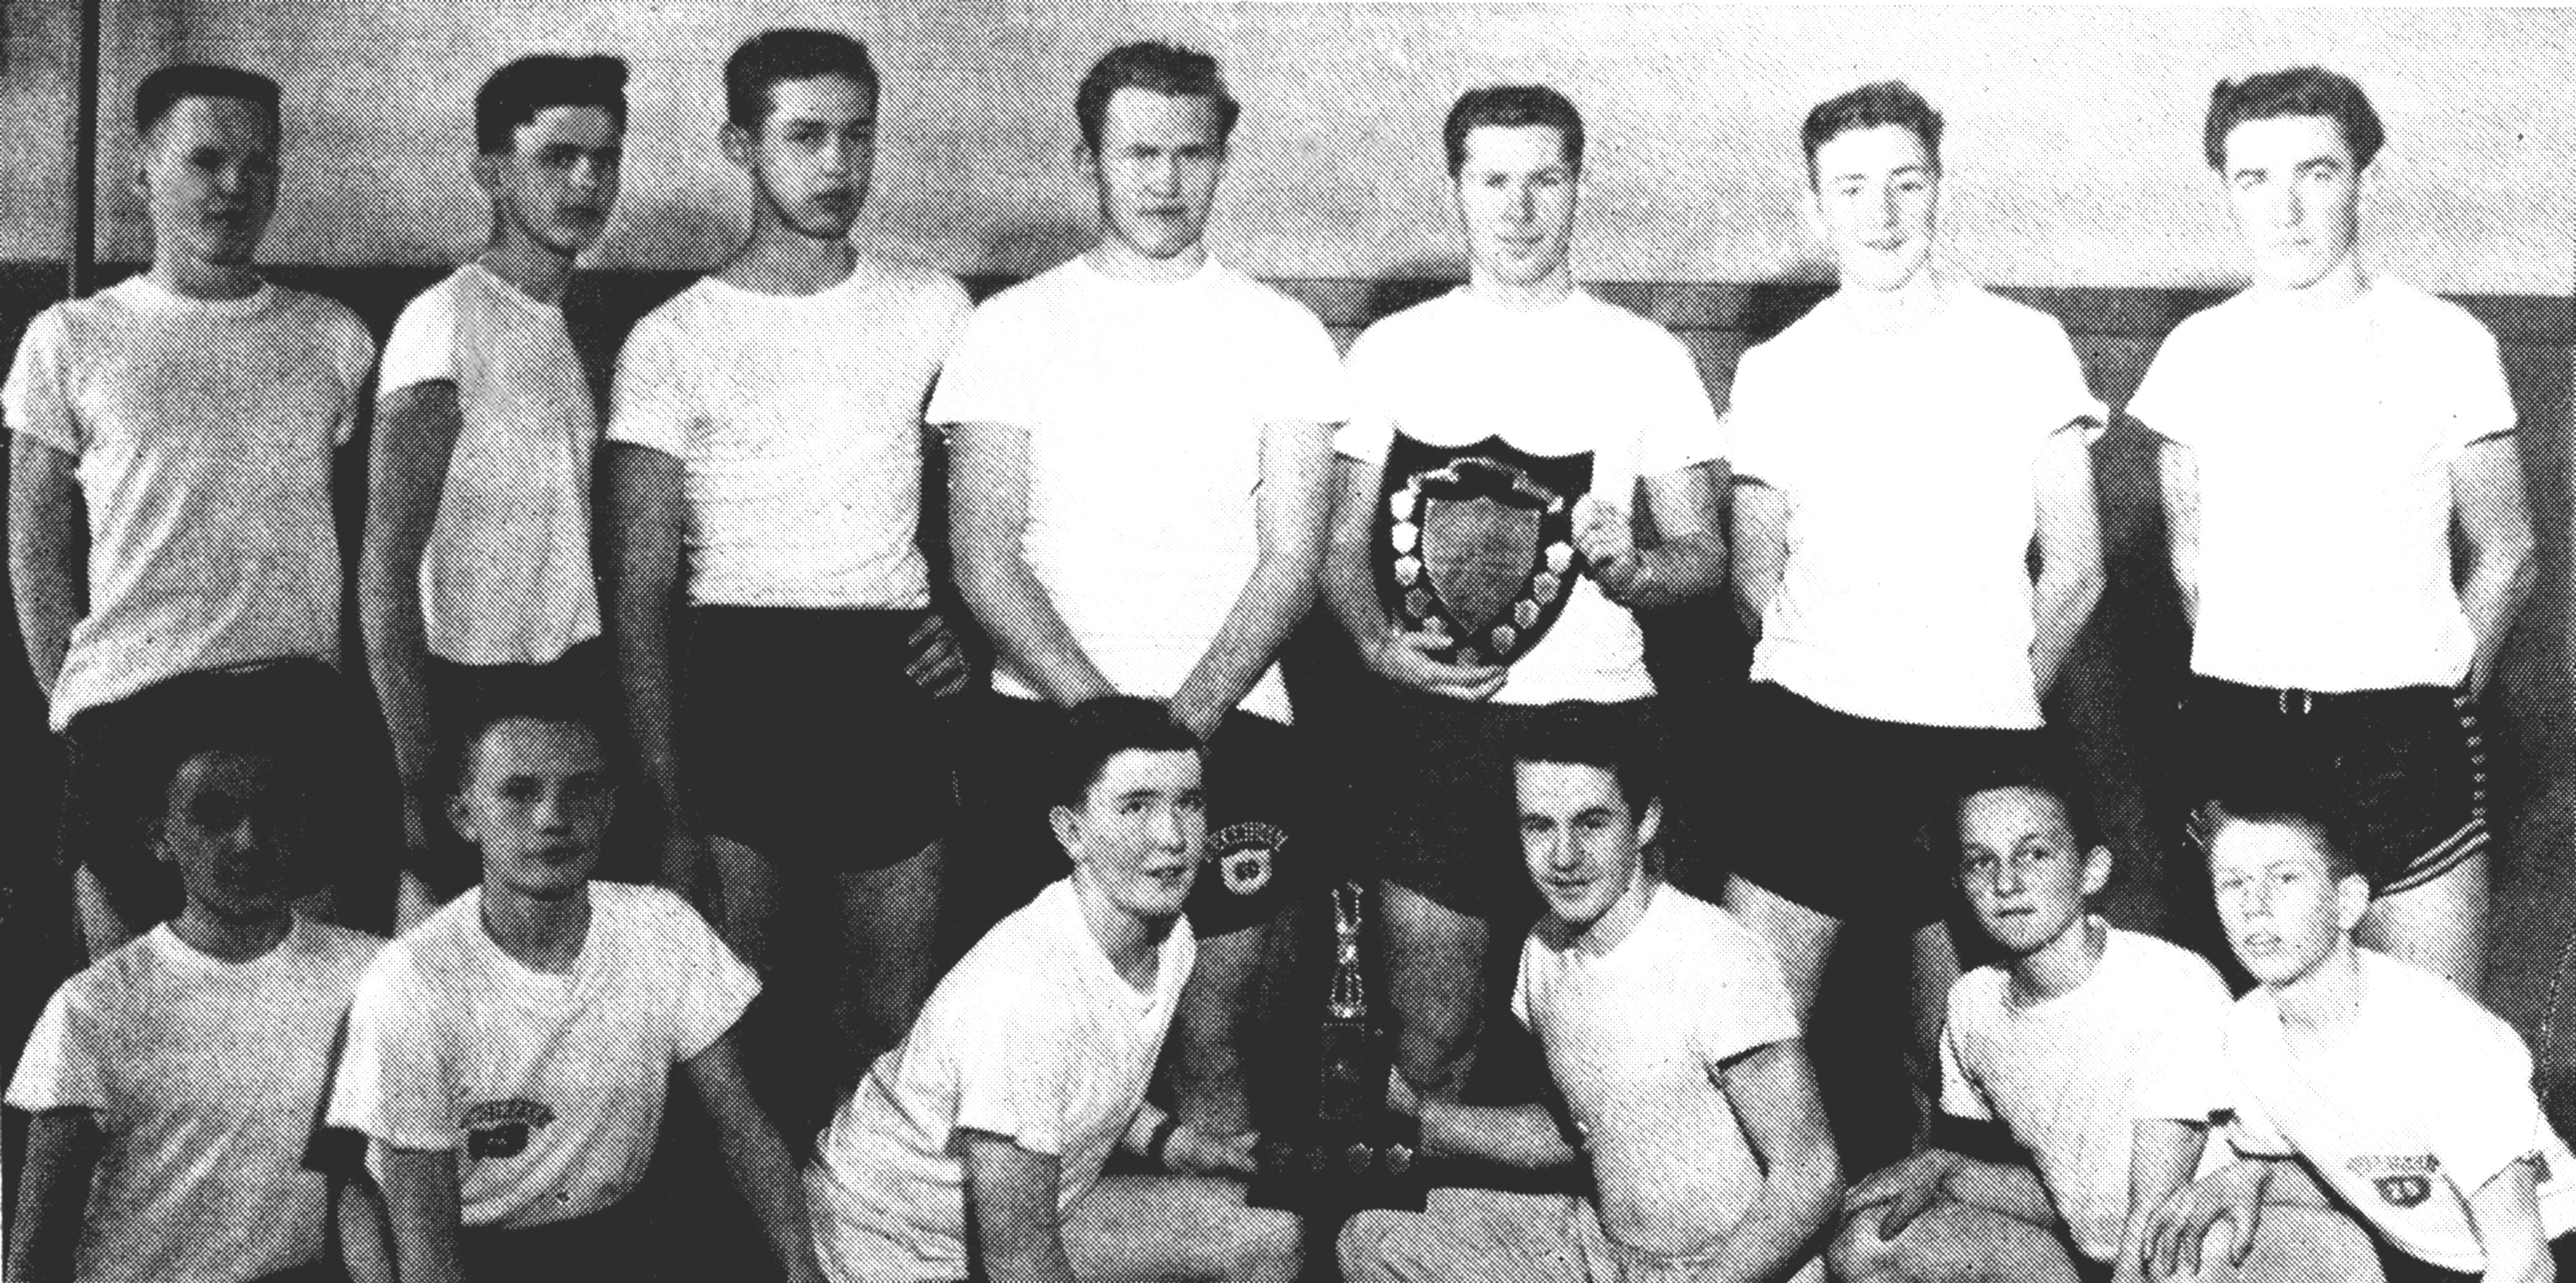 (Click to magnify): FRONT ROW: K. James, G. Harrison, W. Taylor, G. Elson, B. Babick, I. Brown; BACK ROW: A. Oldham, D. Sayers, G. Feasby, D. Culbert, L. Taylor, K. Maye, D. Prentice.